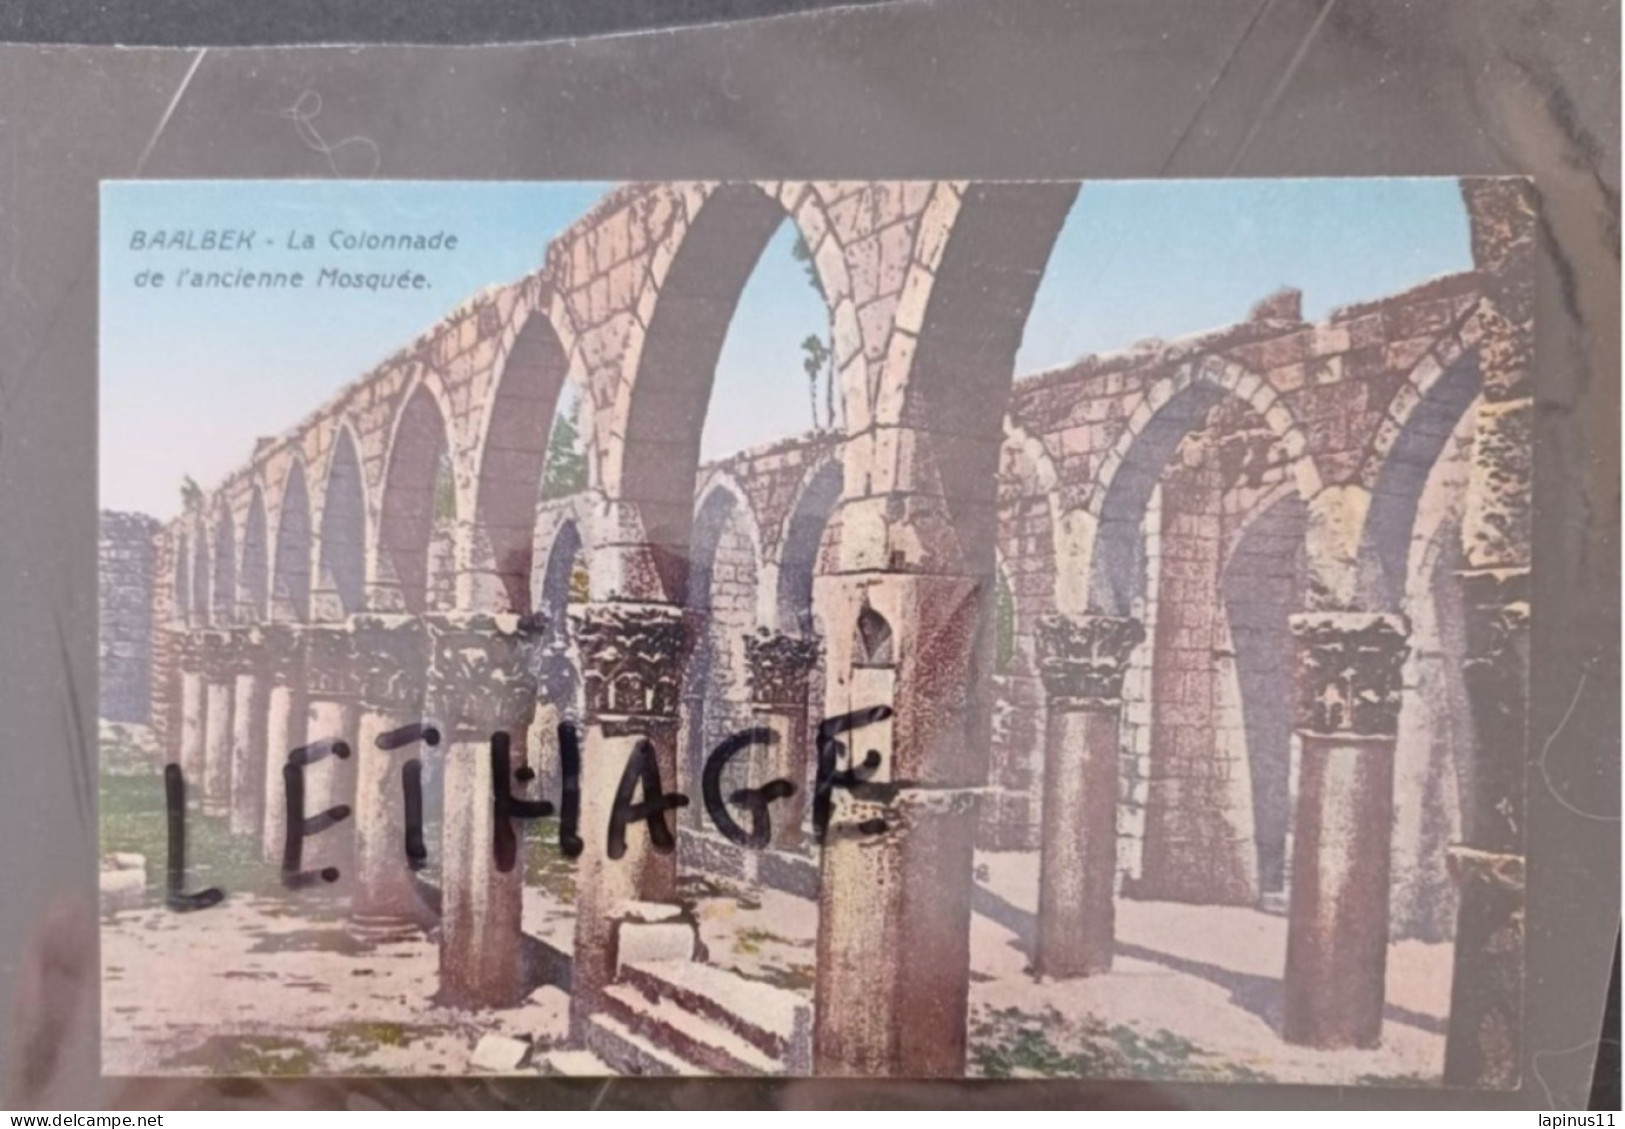 LIBAN BAALBECK COLONNADE MOSQUEE POSTCARD NEW TYPOGRAPHIC PRINT PRODUCED BY SARRAFIAN BROS BEIRUT (COLLECTOR'S)#1/169 - Libanon